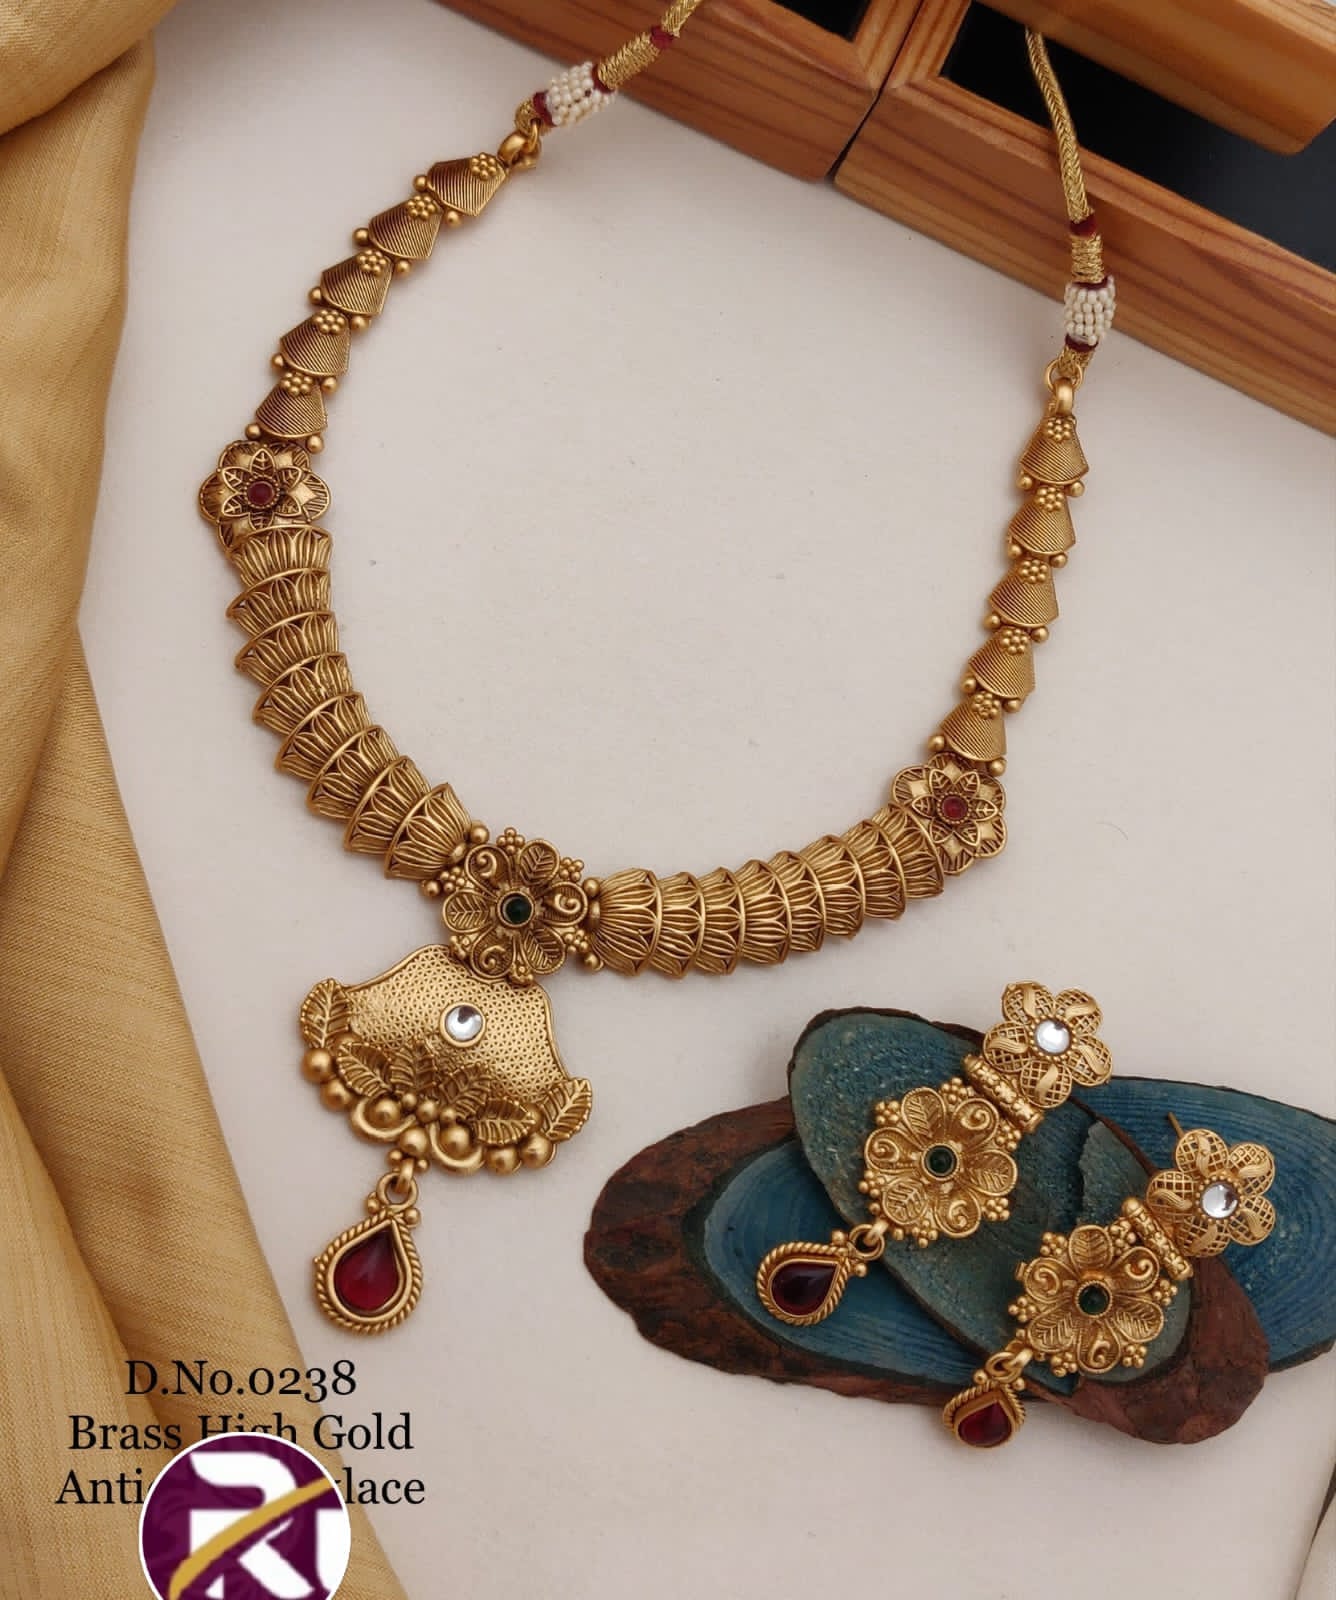 Beautiful High Gold Plated Antique Rajwadi Necklace set with Earrings